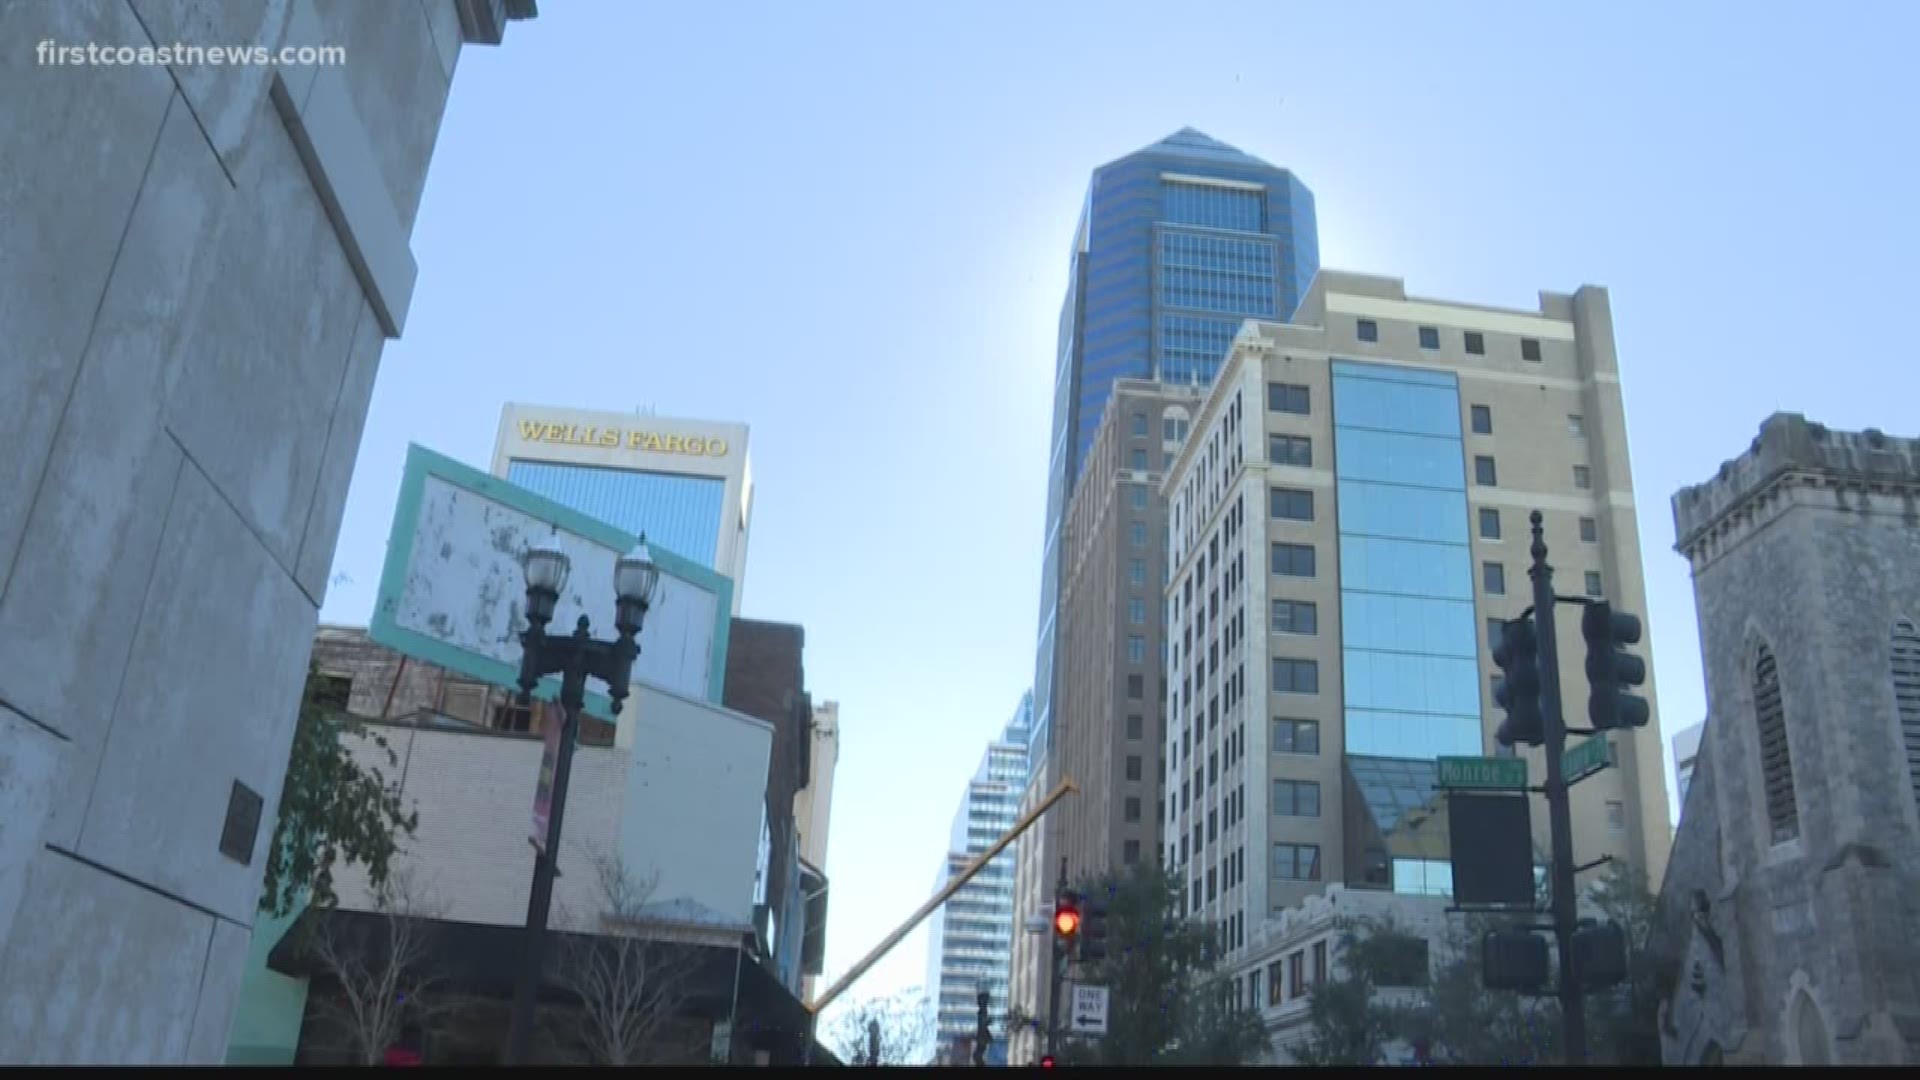 Seems like every week we're seeing a new rendering of how Downtown Jacksonville could look. FCN is downtown talking about a smaller-scale project you may not have seen yet.